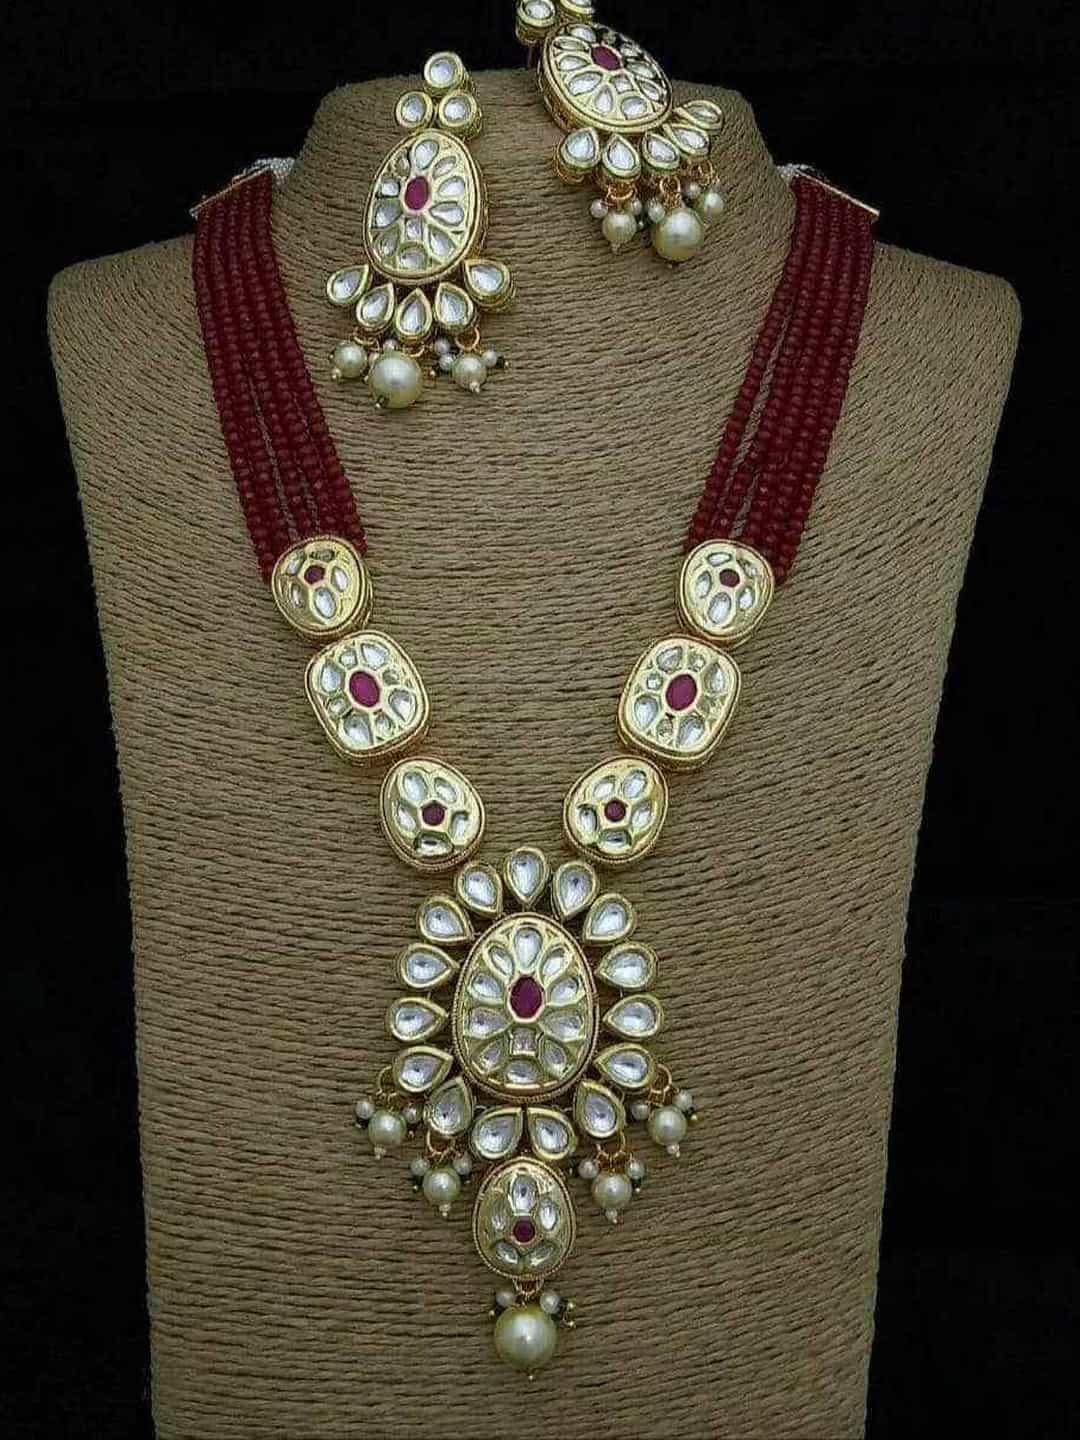 Ishhaara Red Oval Long Pendant Necklace